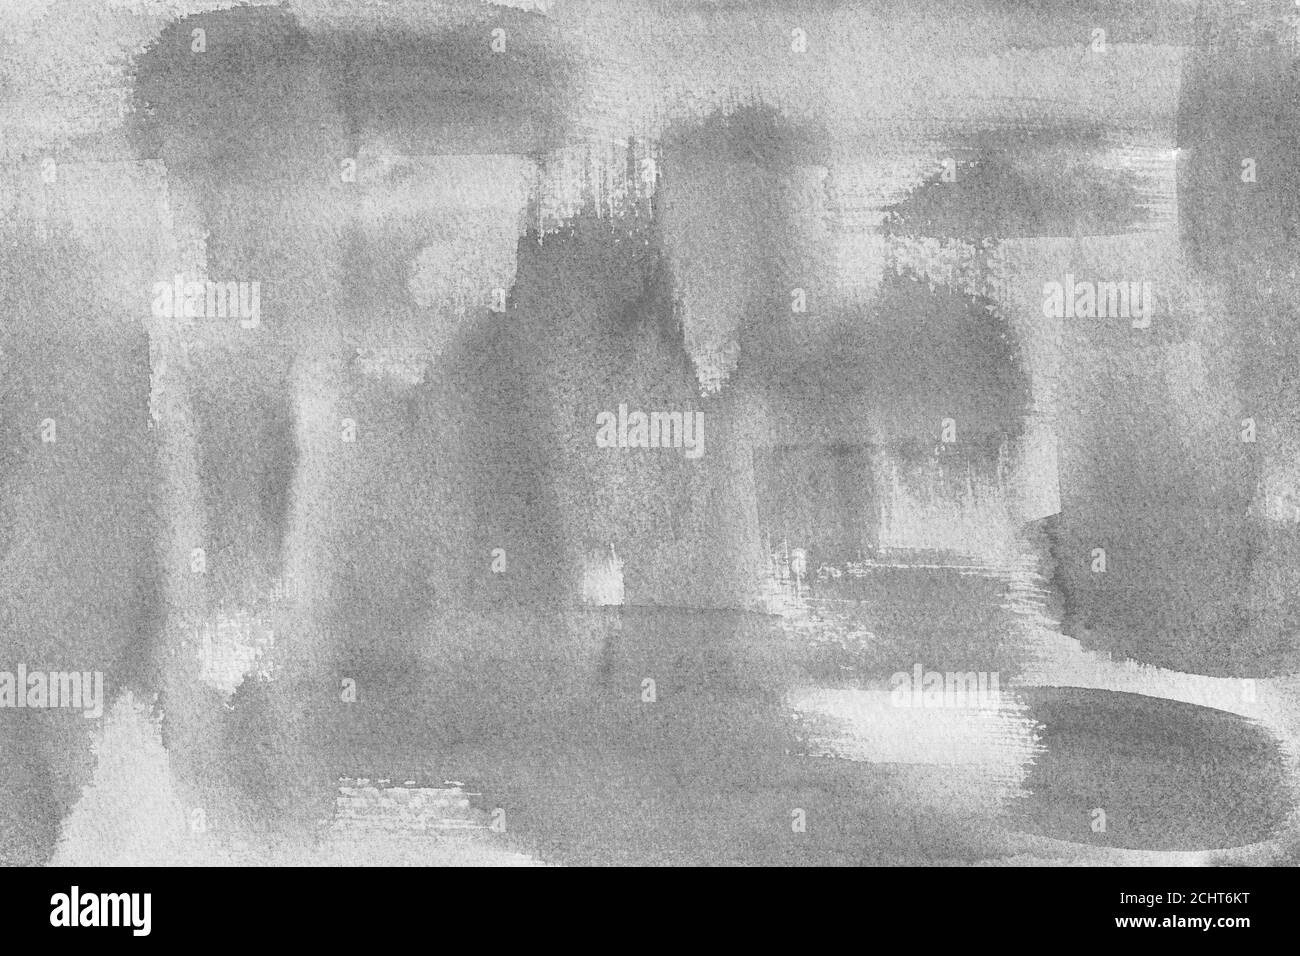 Black and white   abstract watercolor background for textures backgrounds and web banners design Stock Photo